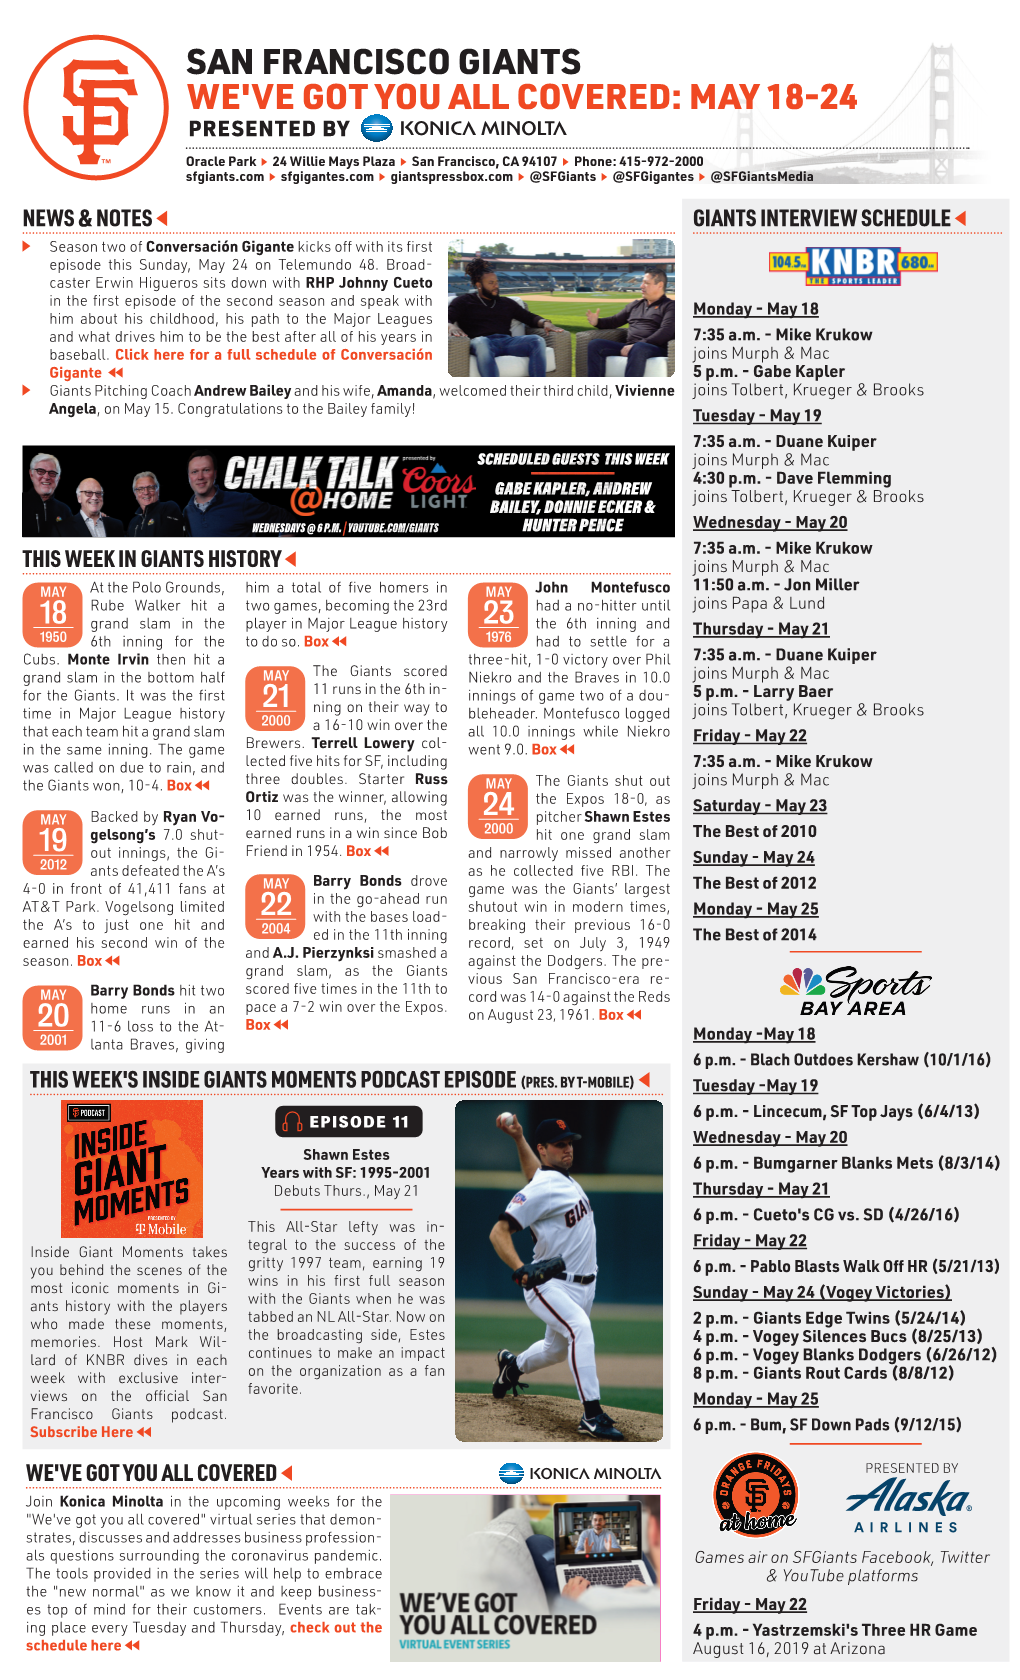 San Francisco Giants We've Got You All Covered: May 18-24 Presented By